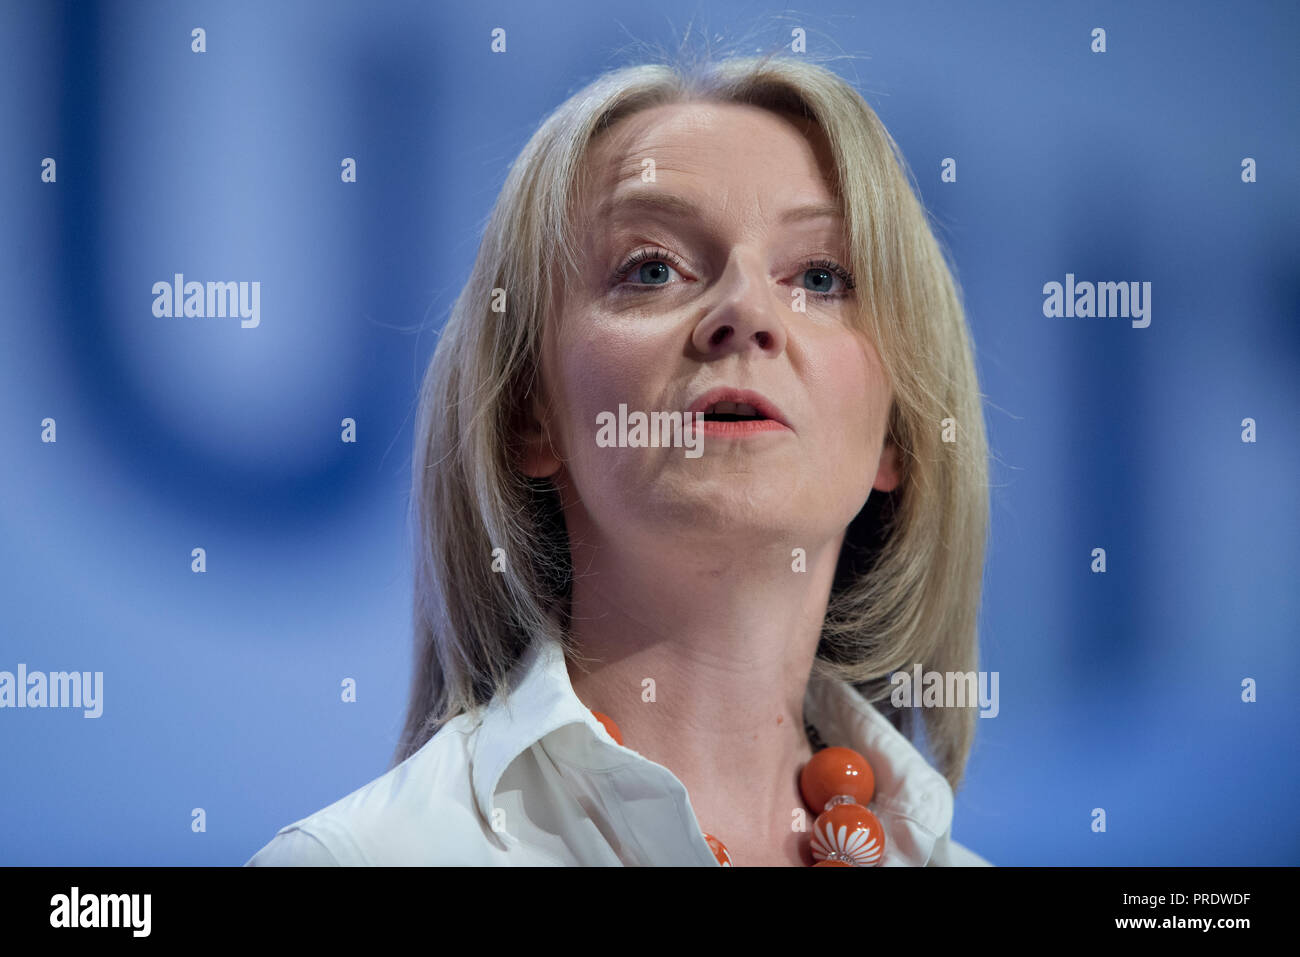 Birmingham, UK. 1st October 2018. Liz Truss, Chief Secretary to the Treasury and Conservative MP for South West Norfolk, speaks at the Conservative Party Conference in Birmingham. © Russell Hart/Alamy Live News. Stock Photo